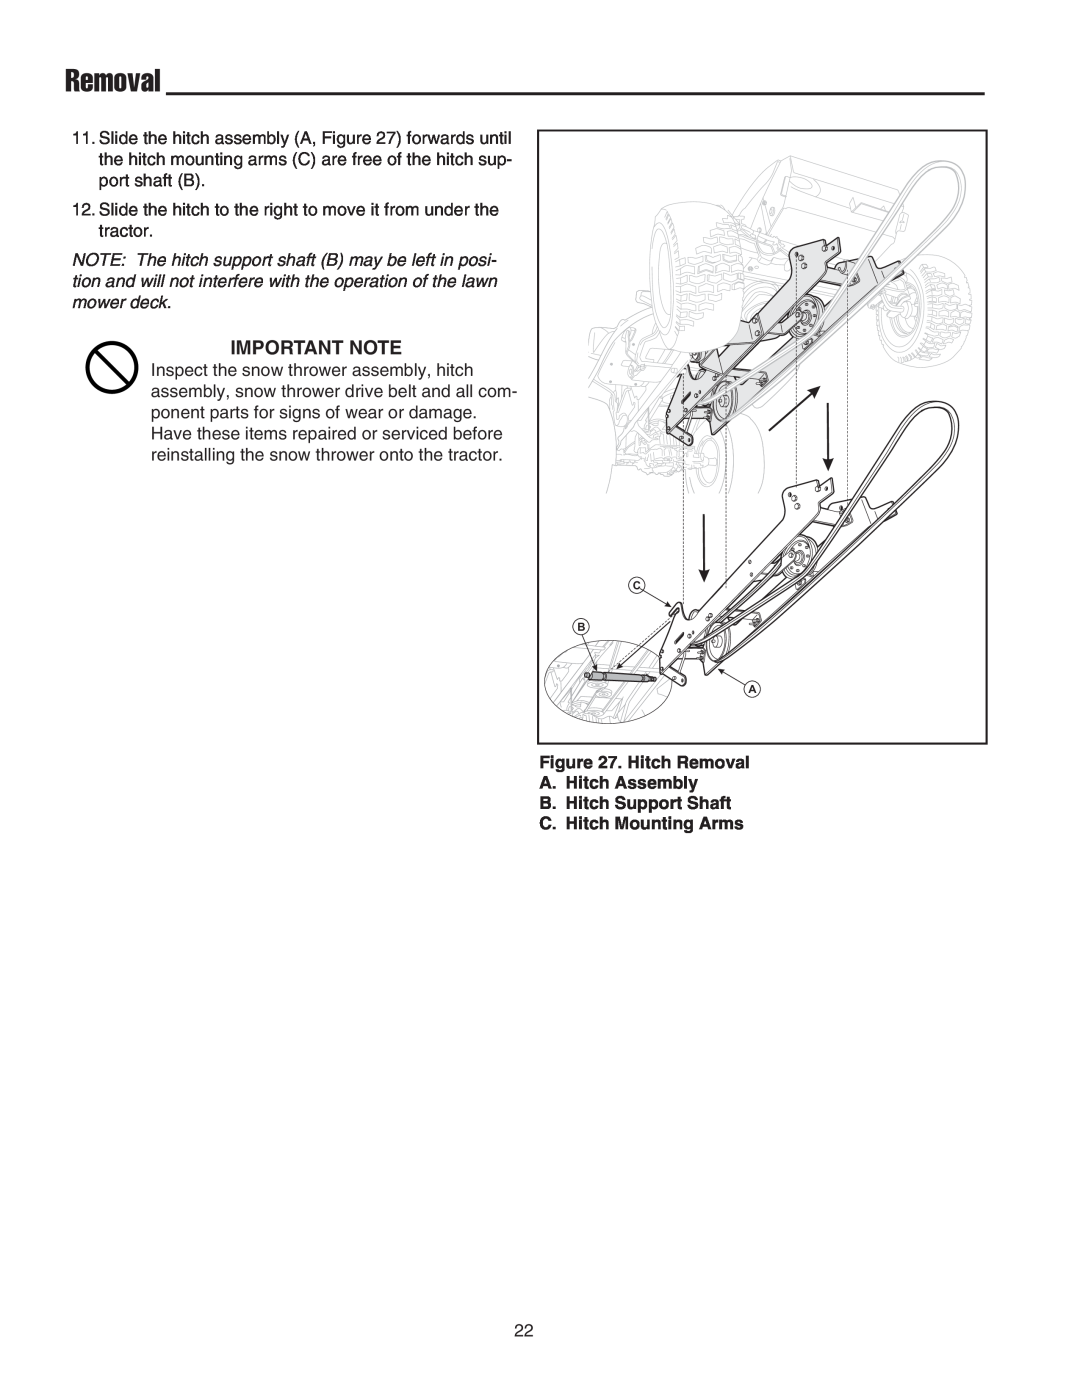 Snapper 42" Single-Stage Snowthrower manual Important Note, Hitch Removal A.Hitch Assembly 